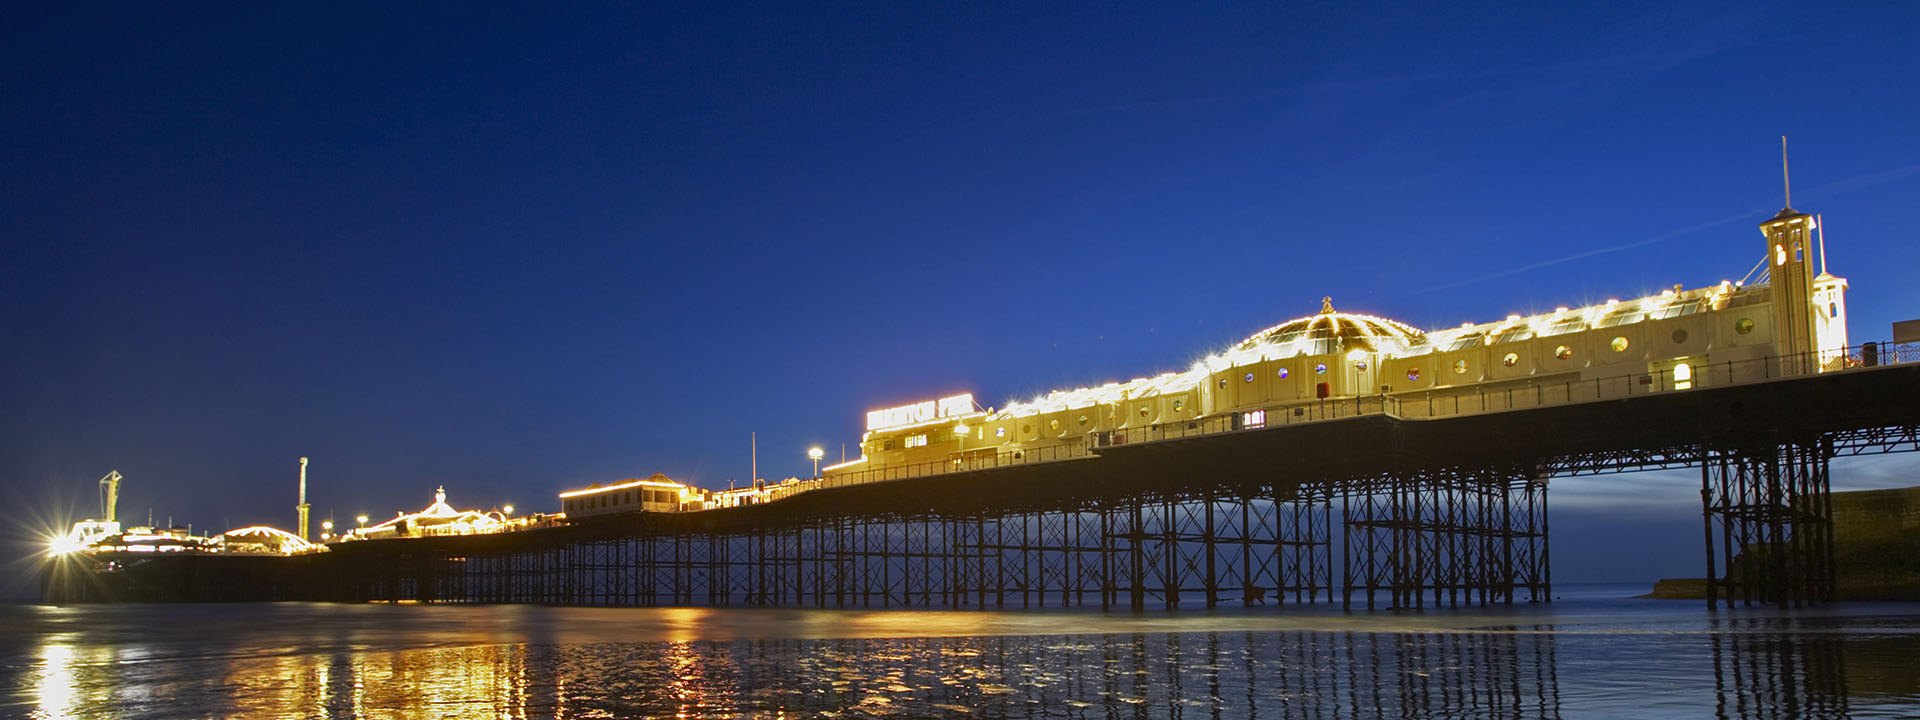 Photo of the Brighton (UK) pier at night reflected in the water